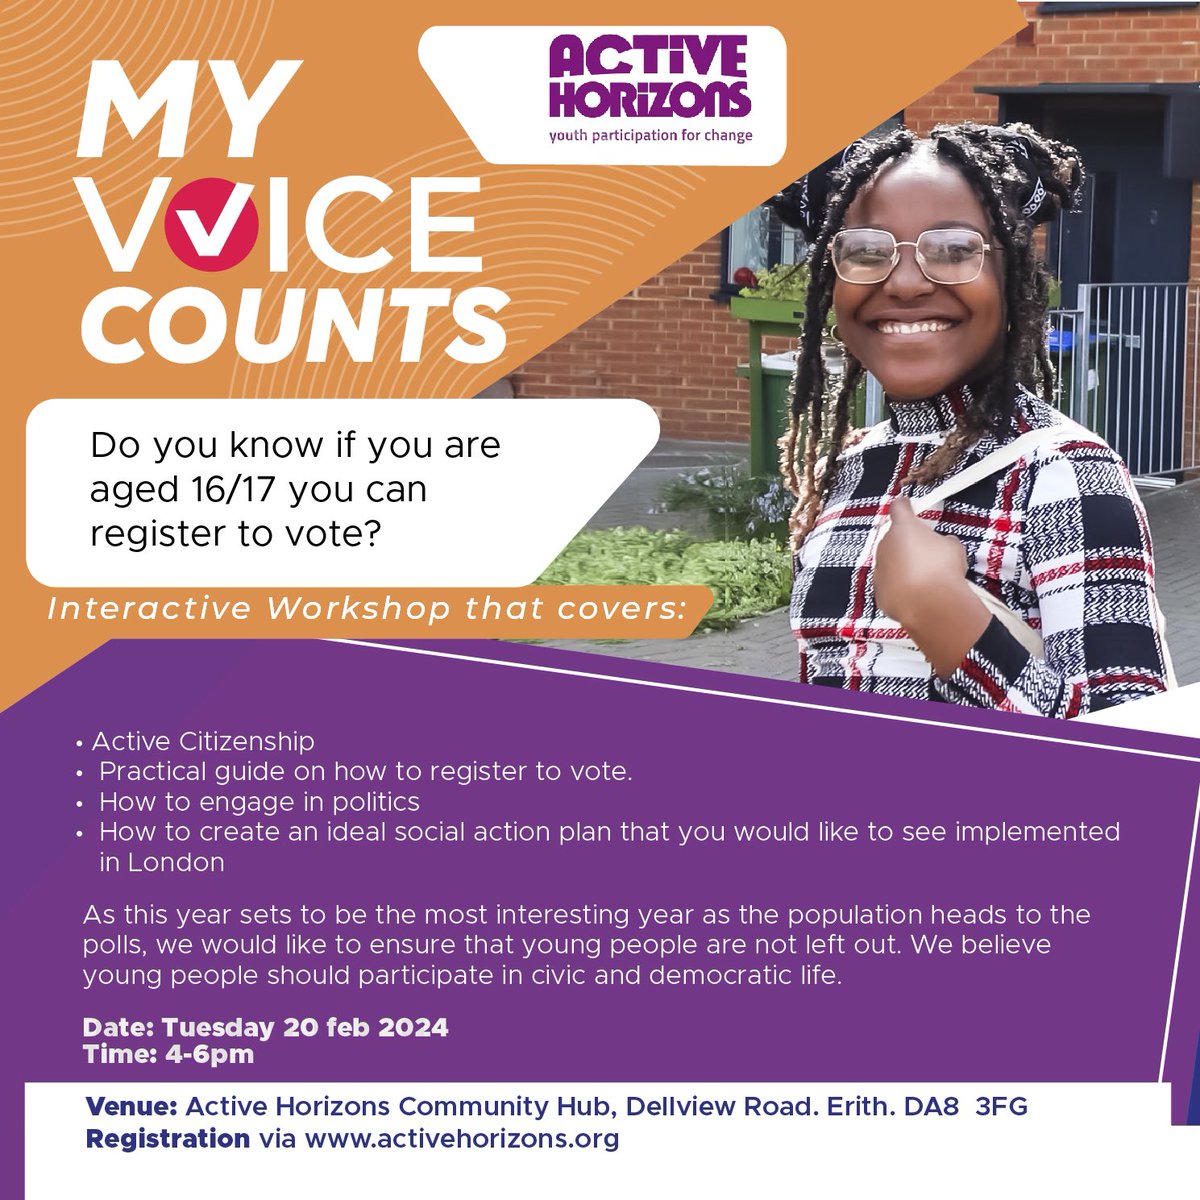 Just a week to go, for the Young voters registration event. An interactive workshops to engage youths to understand the democratic process and why it is important to register to vote. For further information visit website activehorizons.org